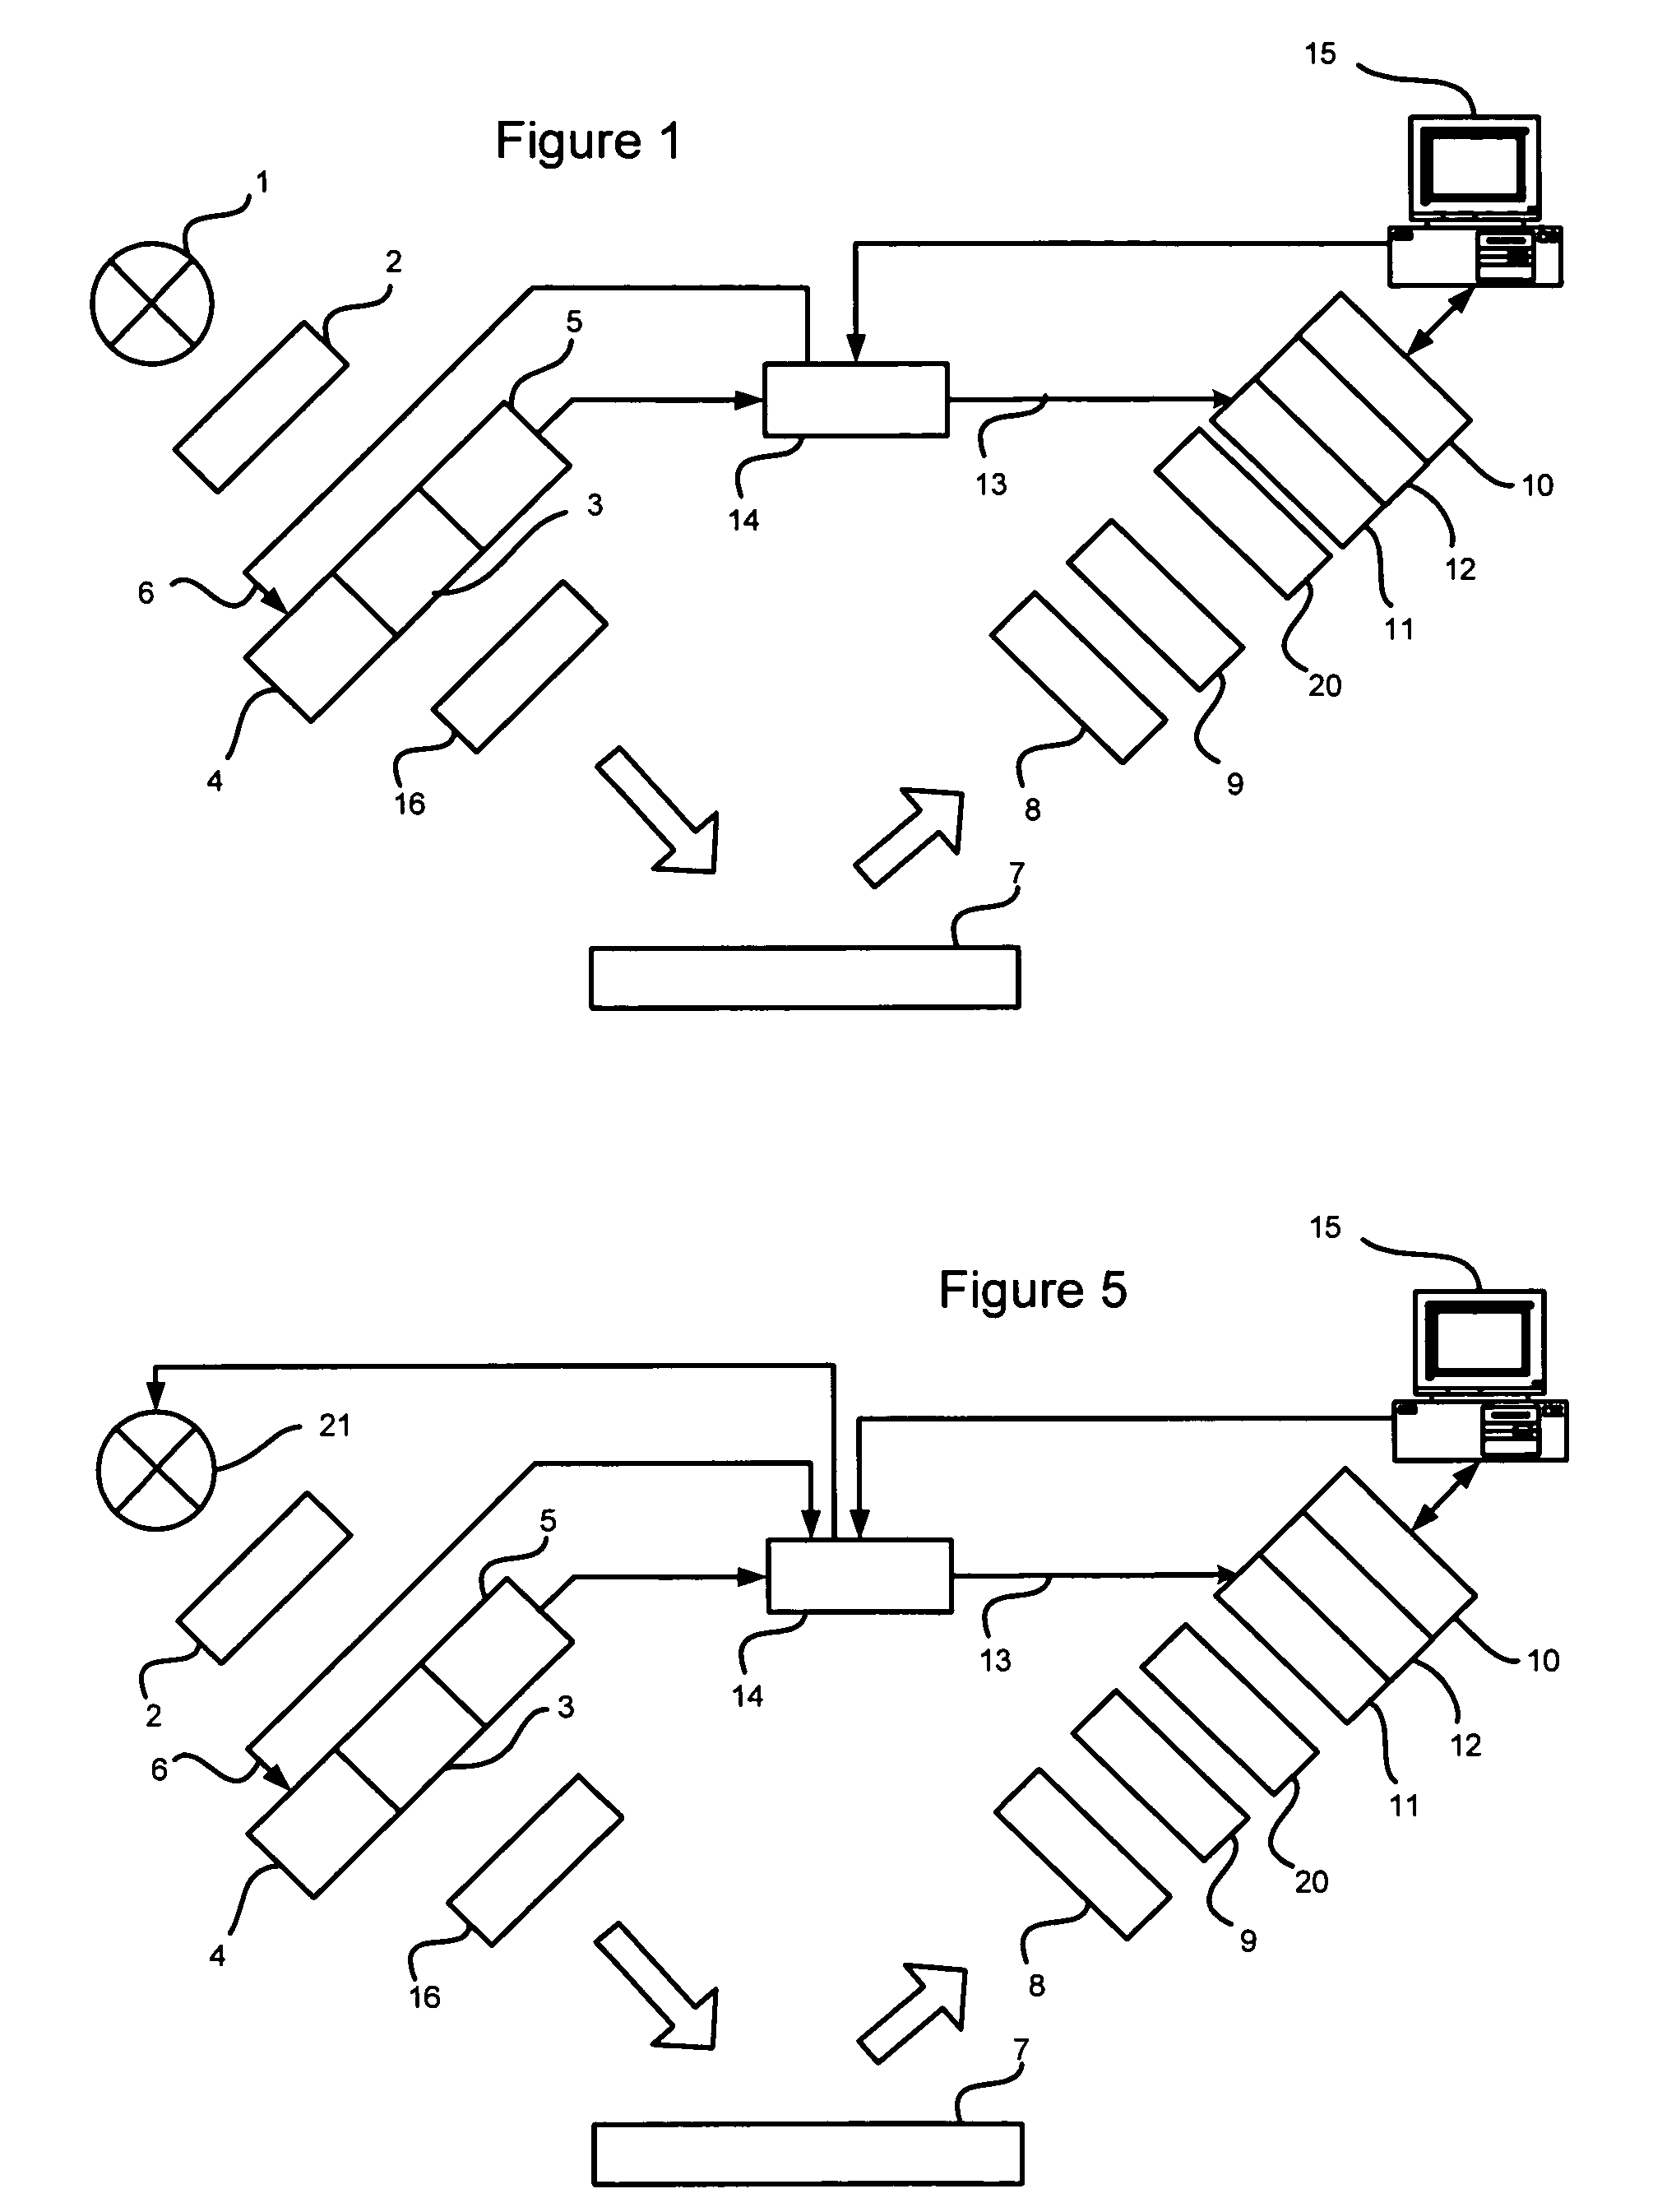 Method of performing optical measurement on a sample